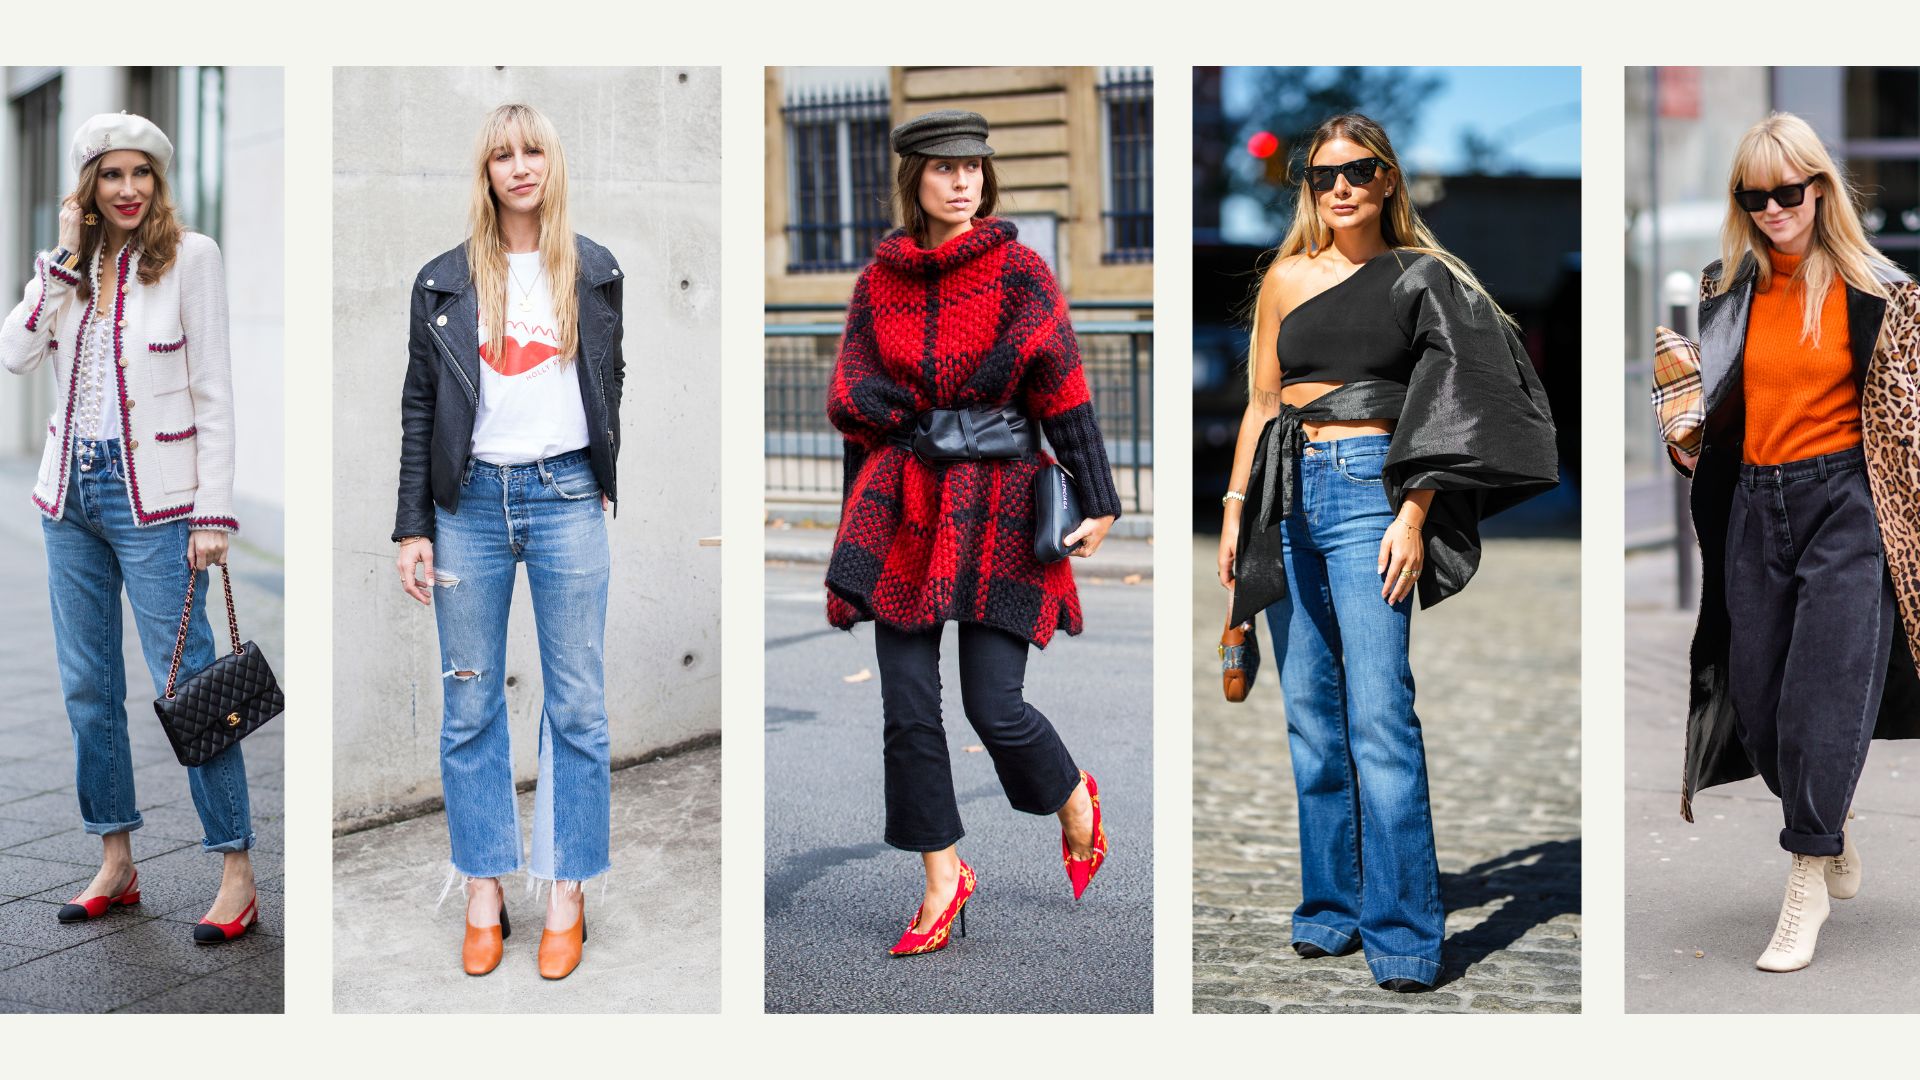 How to style jeans: 7 ways to wear jeans to refresh your look